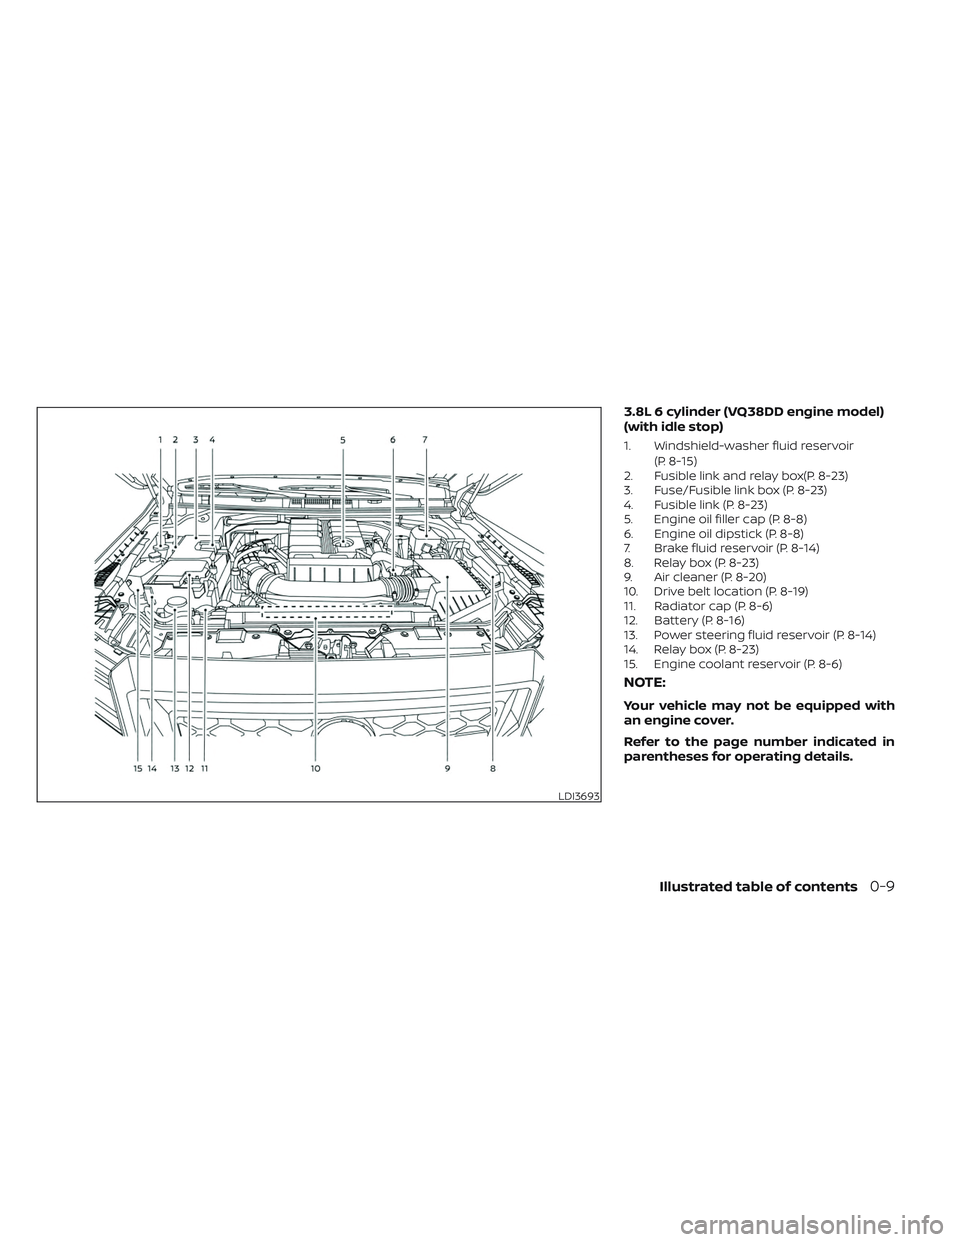 NISSAN FRONTIER 2023 User Guide 3.8L 6 cylinder (VQ38DD engine model)
(with idle stop)
1. Windshield-washer fluid reservoir(P. 8-15)
2. Fusible link and relay box(P. 8-23)
3. Fuse/Fusible link box (P. 8-23)
4. Fusible link (P. 8-23)